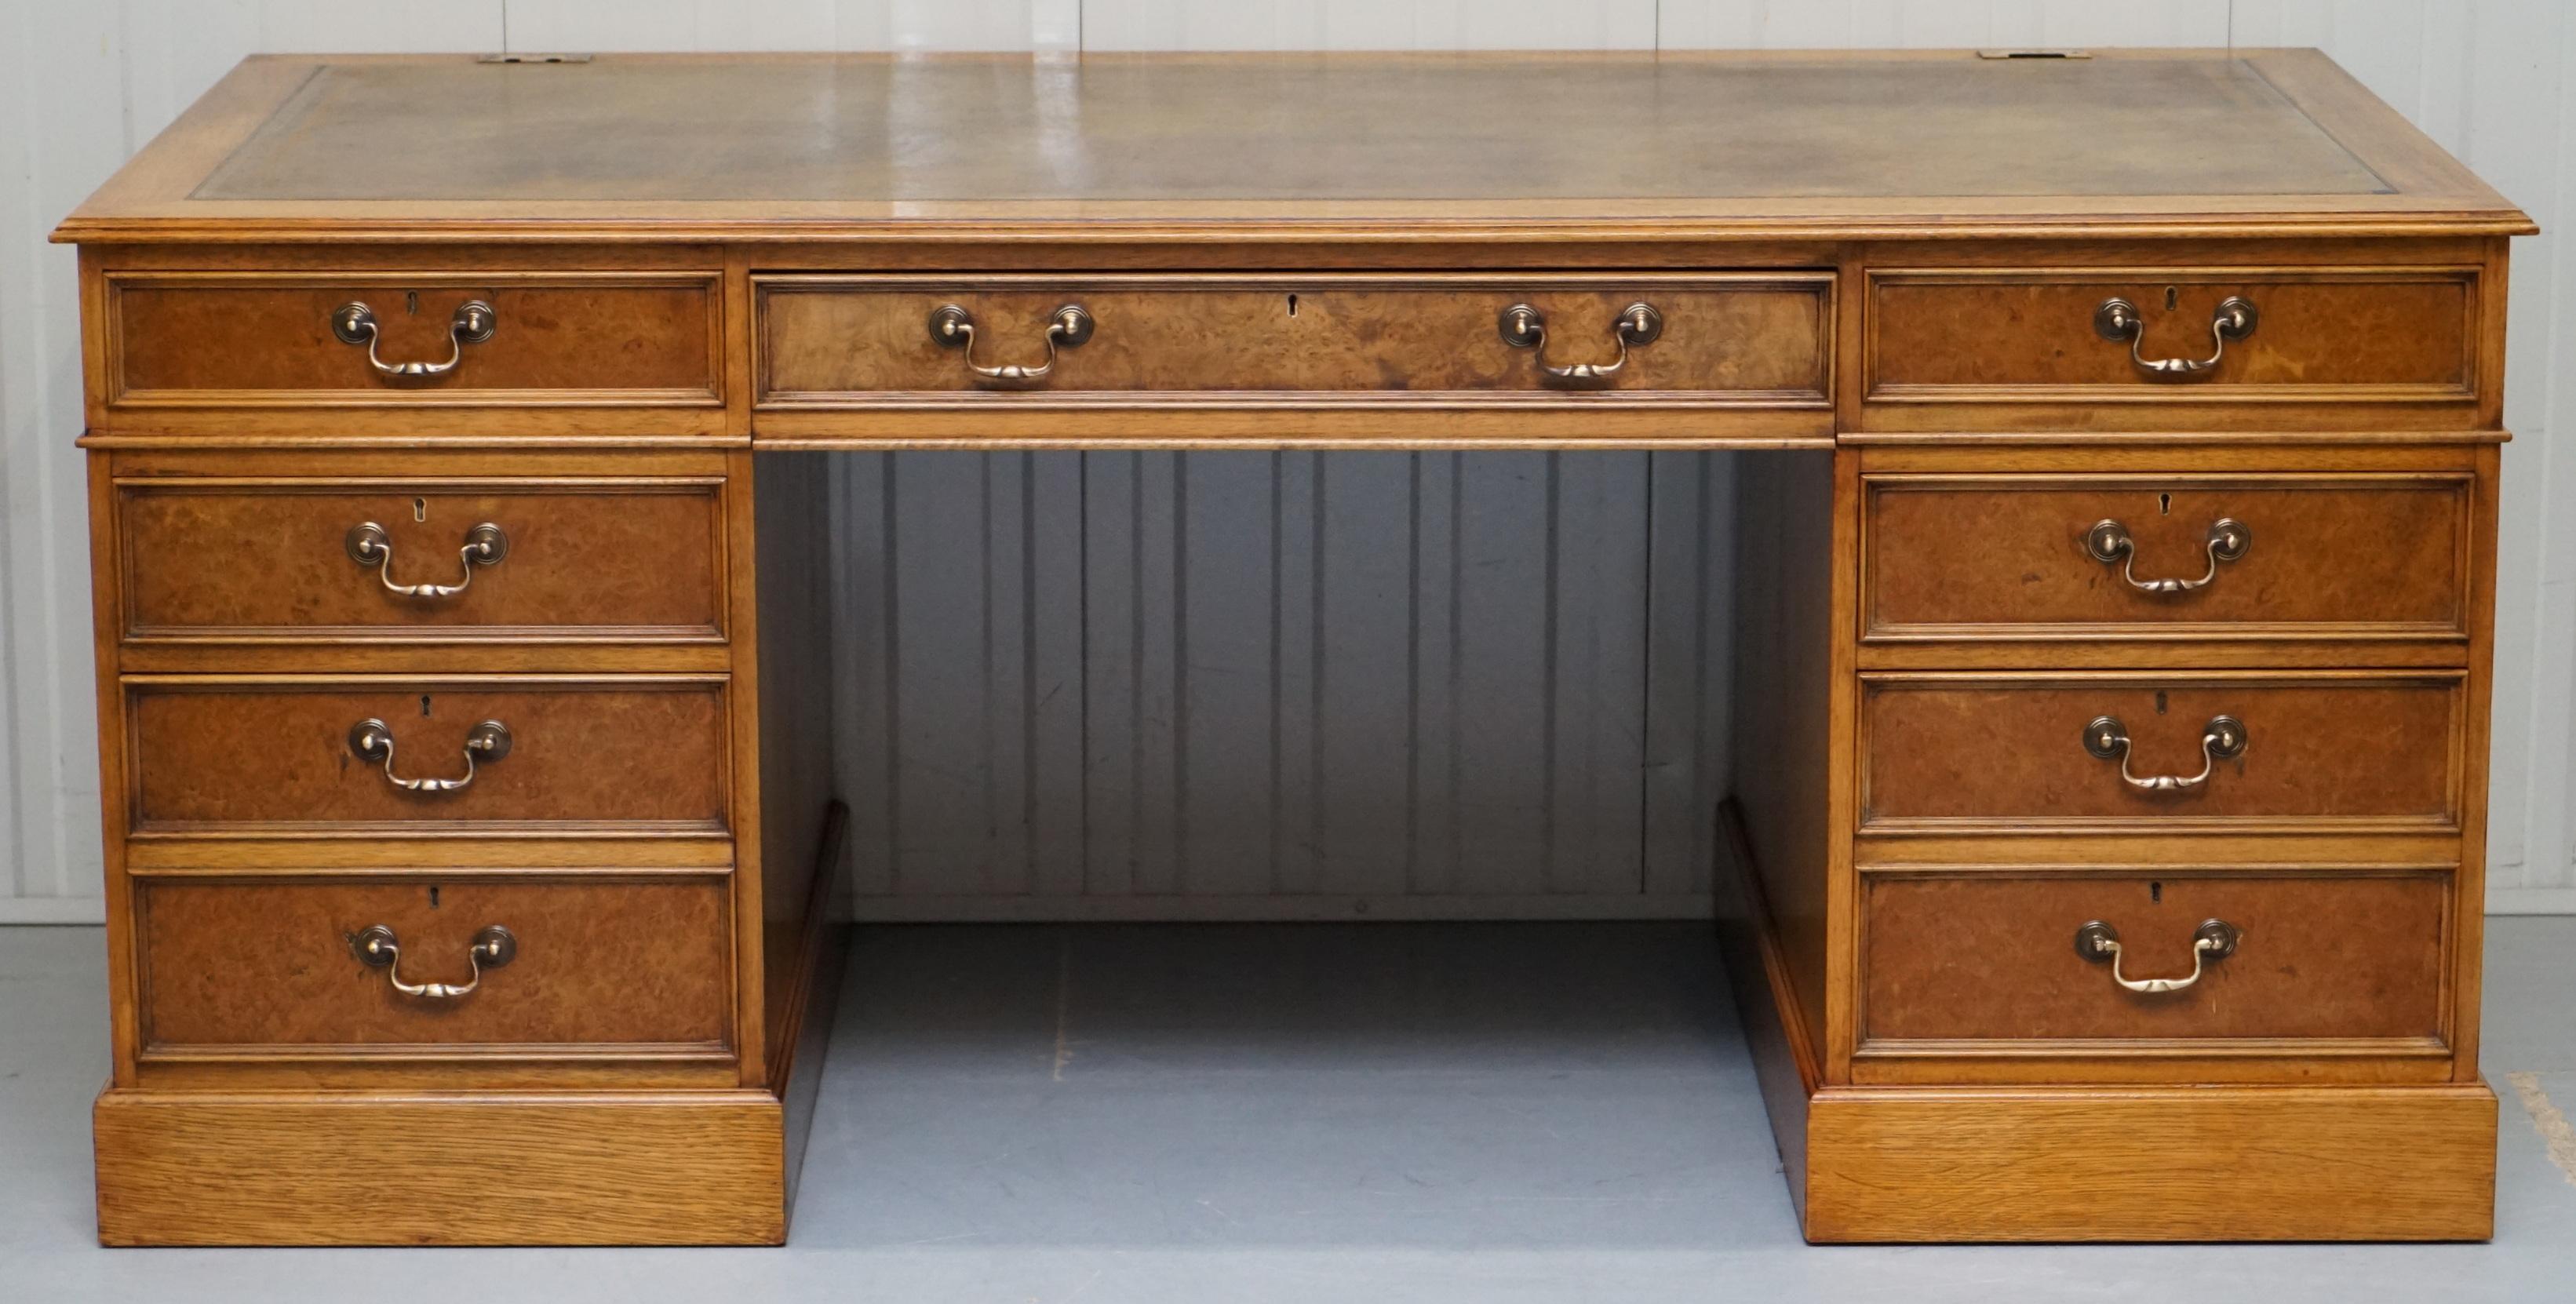 We are delighted to offer for sale this custom made large burr walnut and oak framed twin pedestal partner desk with rare sliding top.

This desk is very rare, the entire desktop sides forward which helps you with leg space, it also has a drop